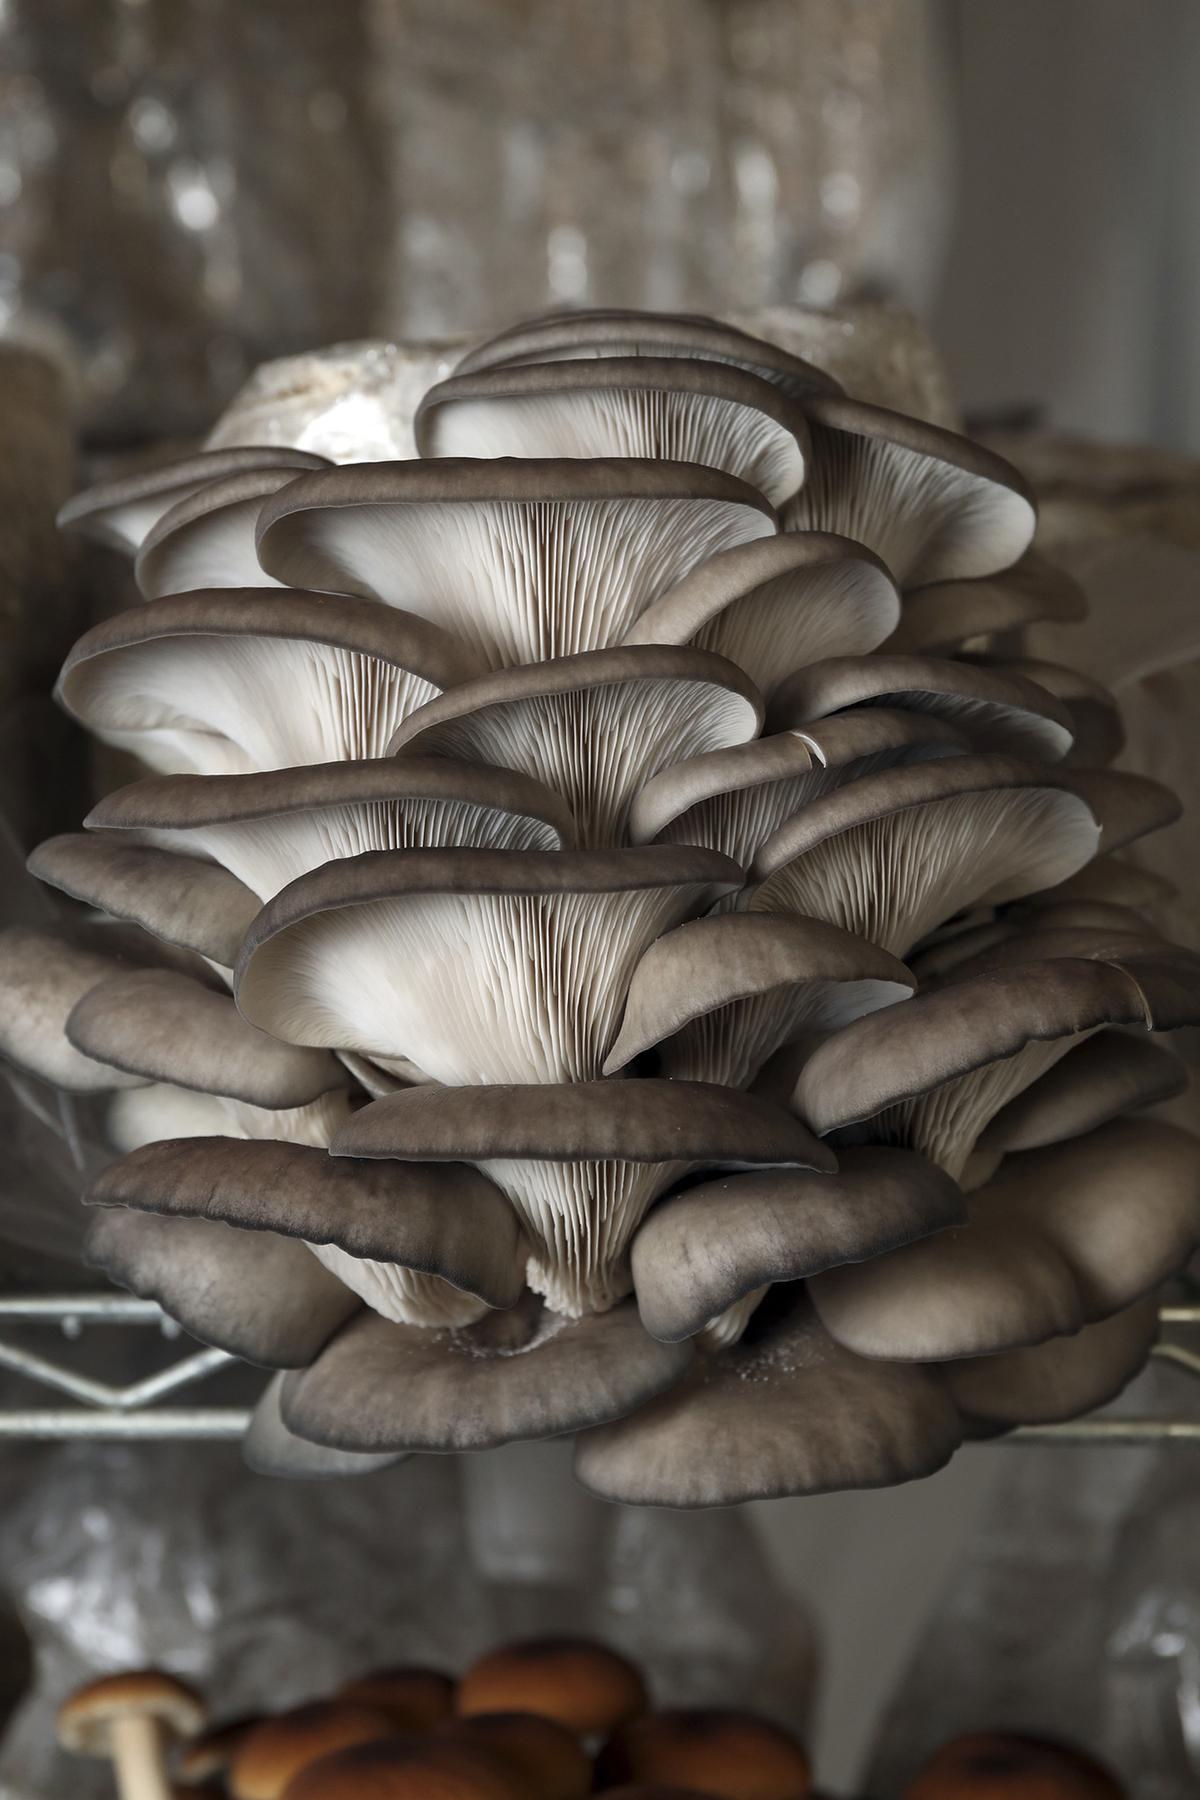 Blue Oyster mushrooms grown at Chicago-based Four Star Mushrooms, on May 17, 2022. (Terrence Antonio James/Chicago Tribune/TNS)